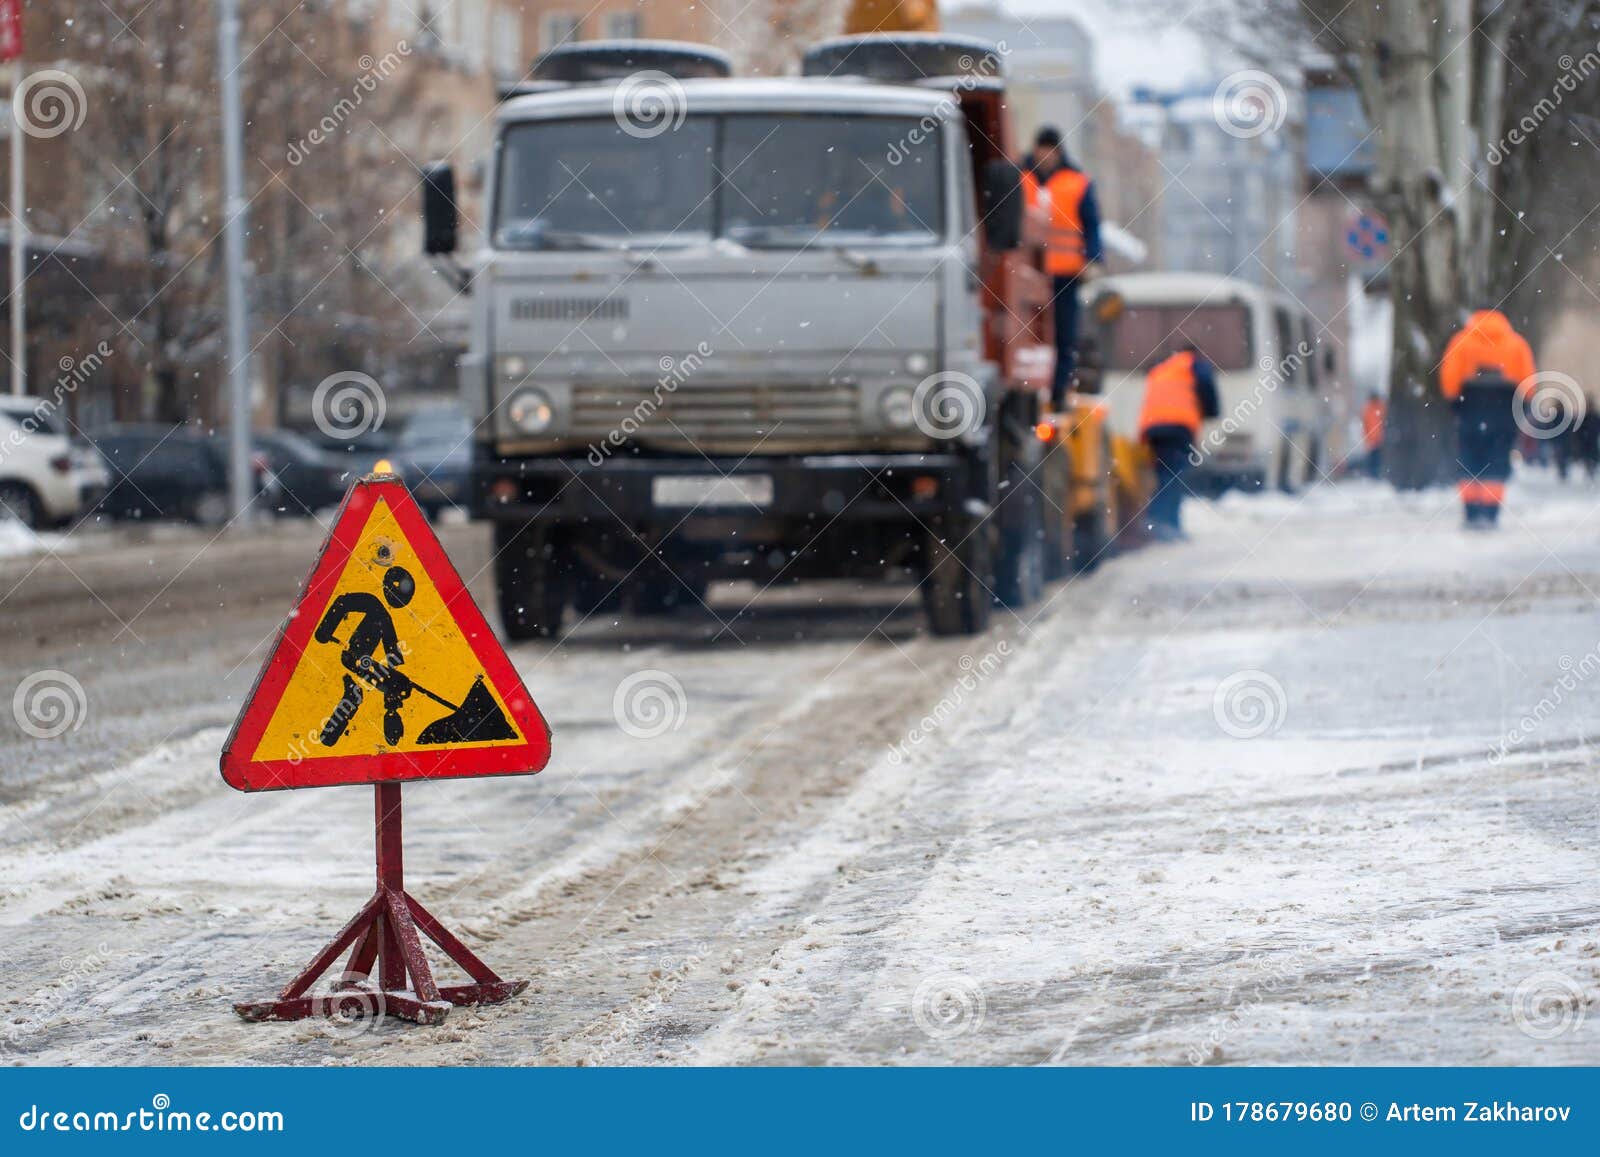 snowblower clear freezing winter road with snow and ice.snow-plow remove snow from the city street.warning road sign